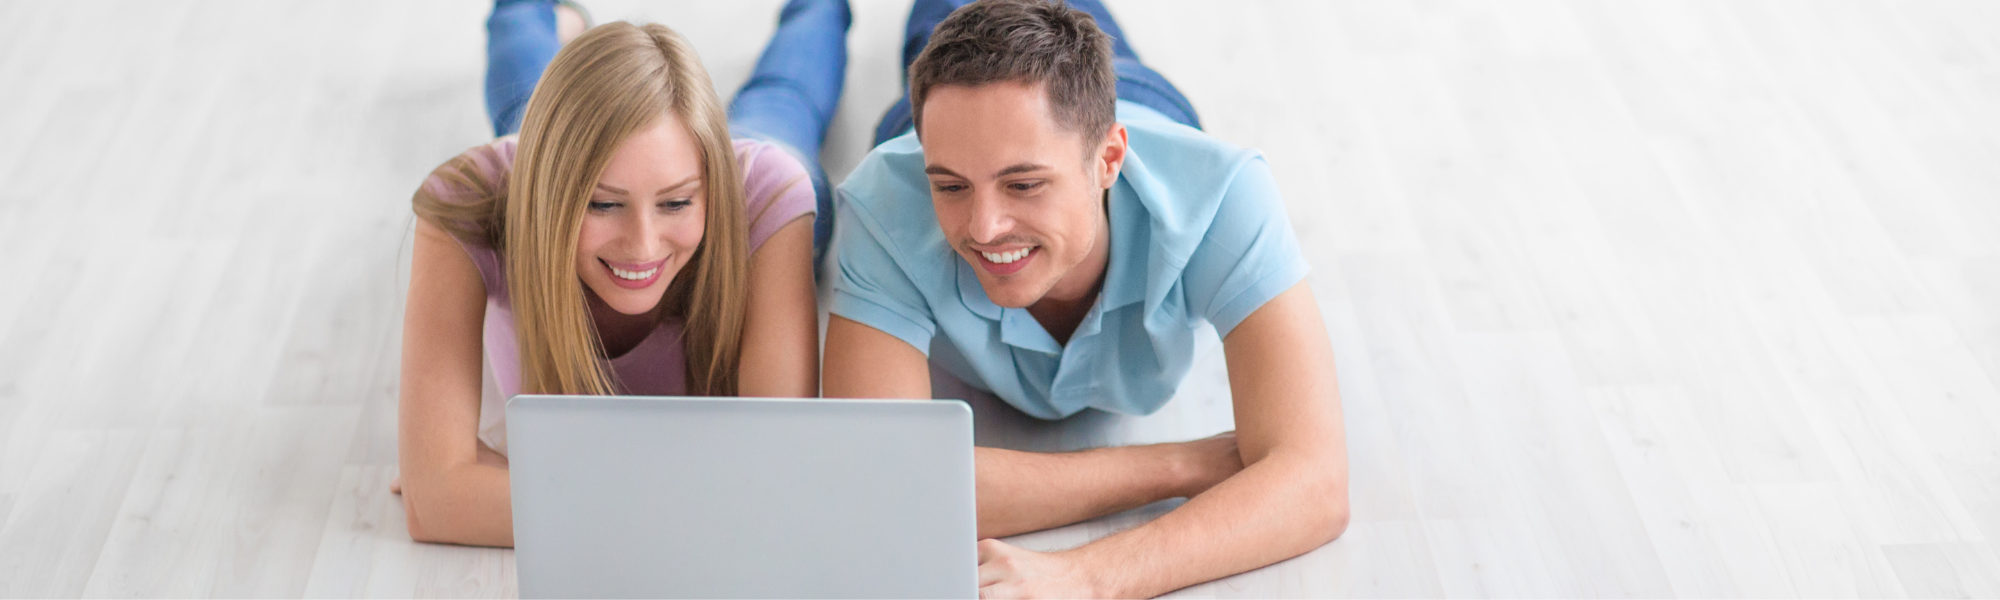 Couple reviewing insurance plans on a laptop 